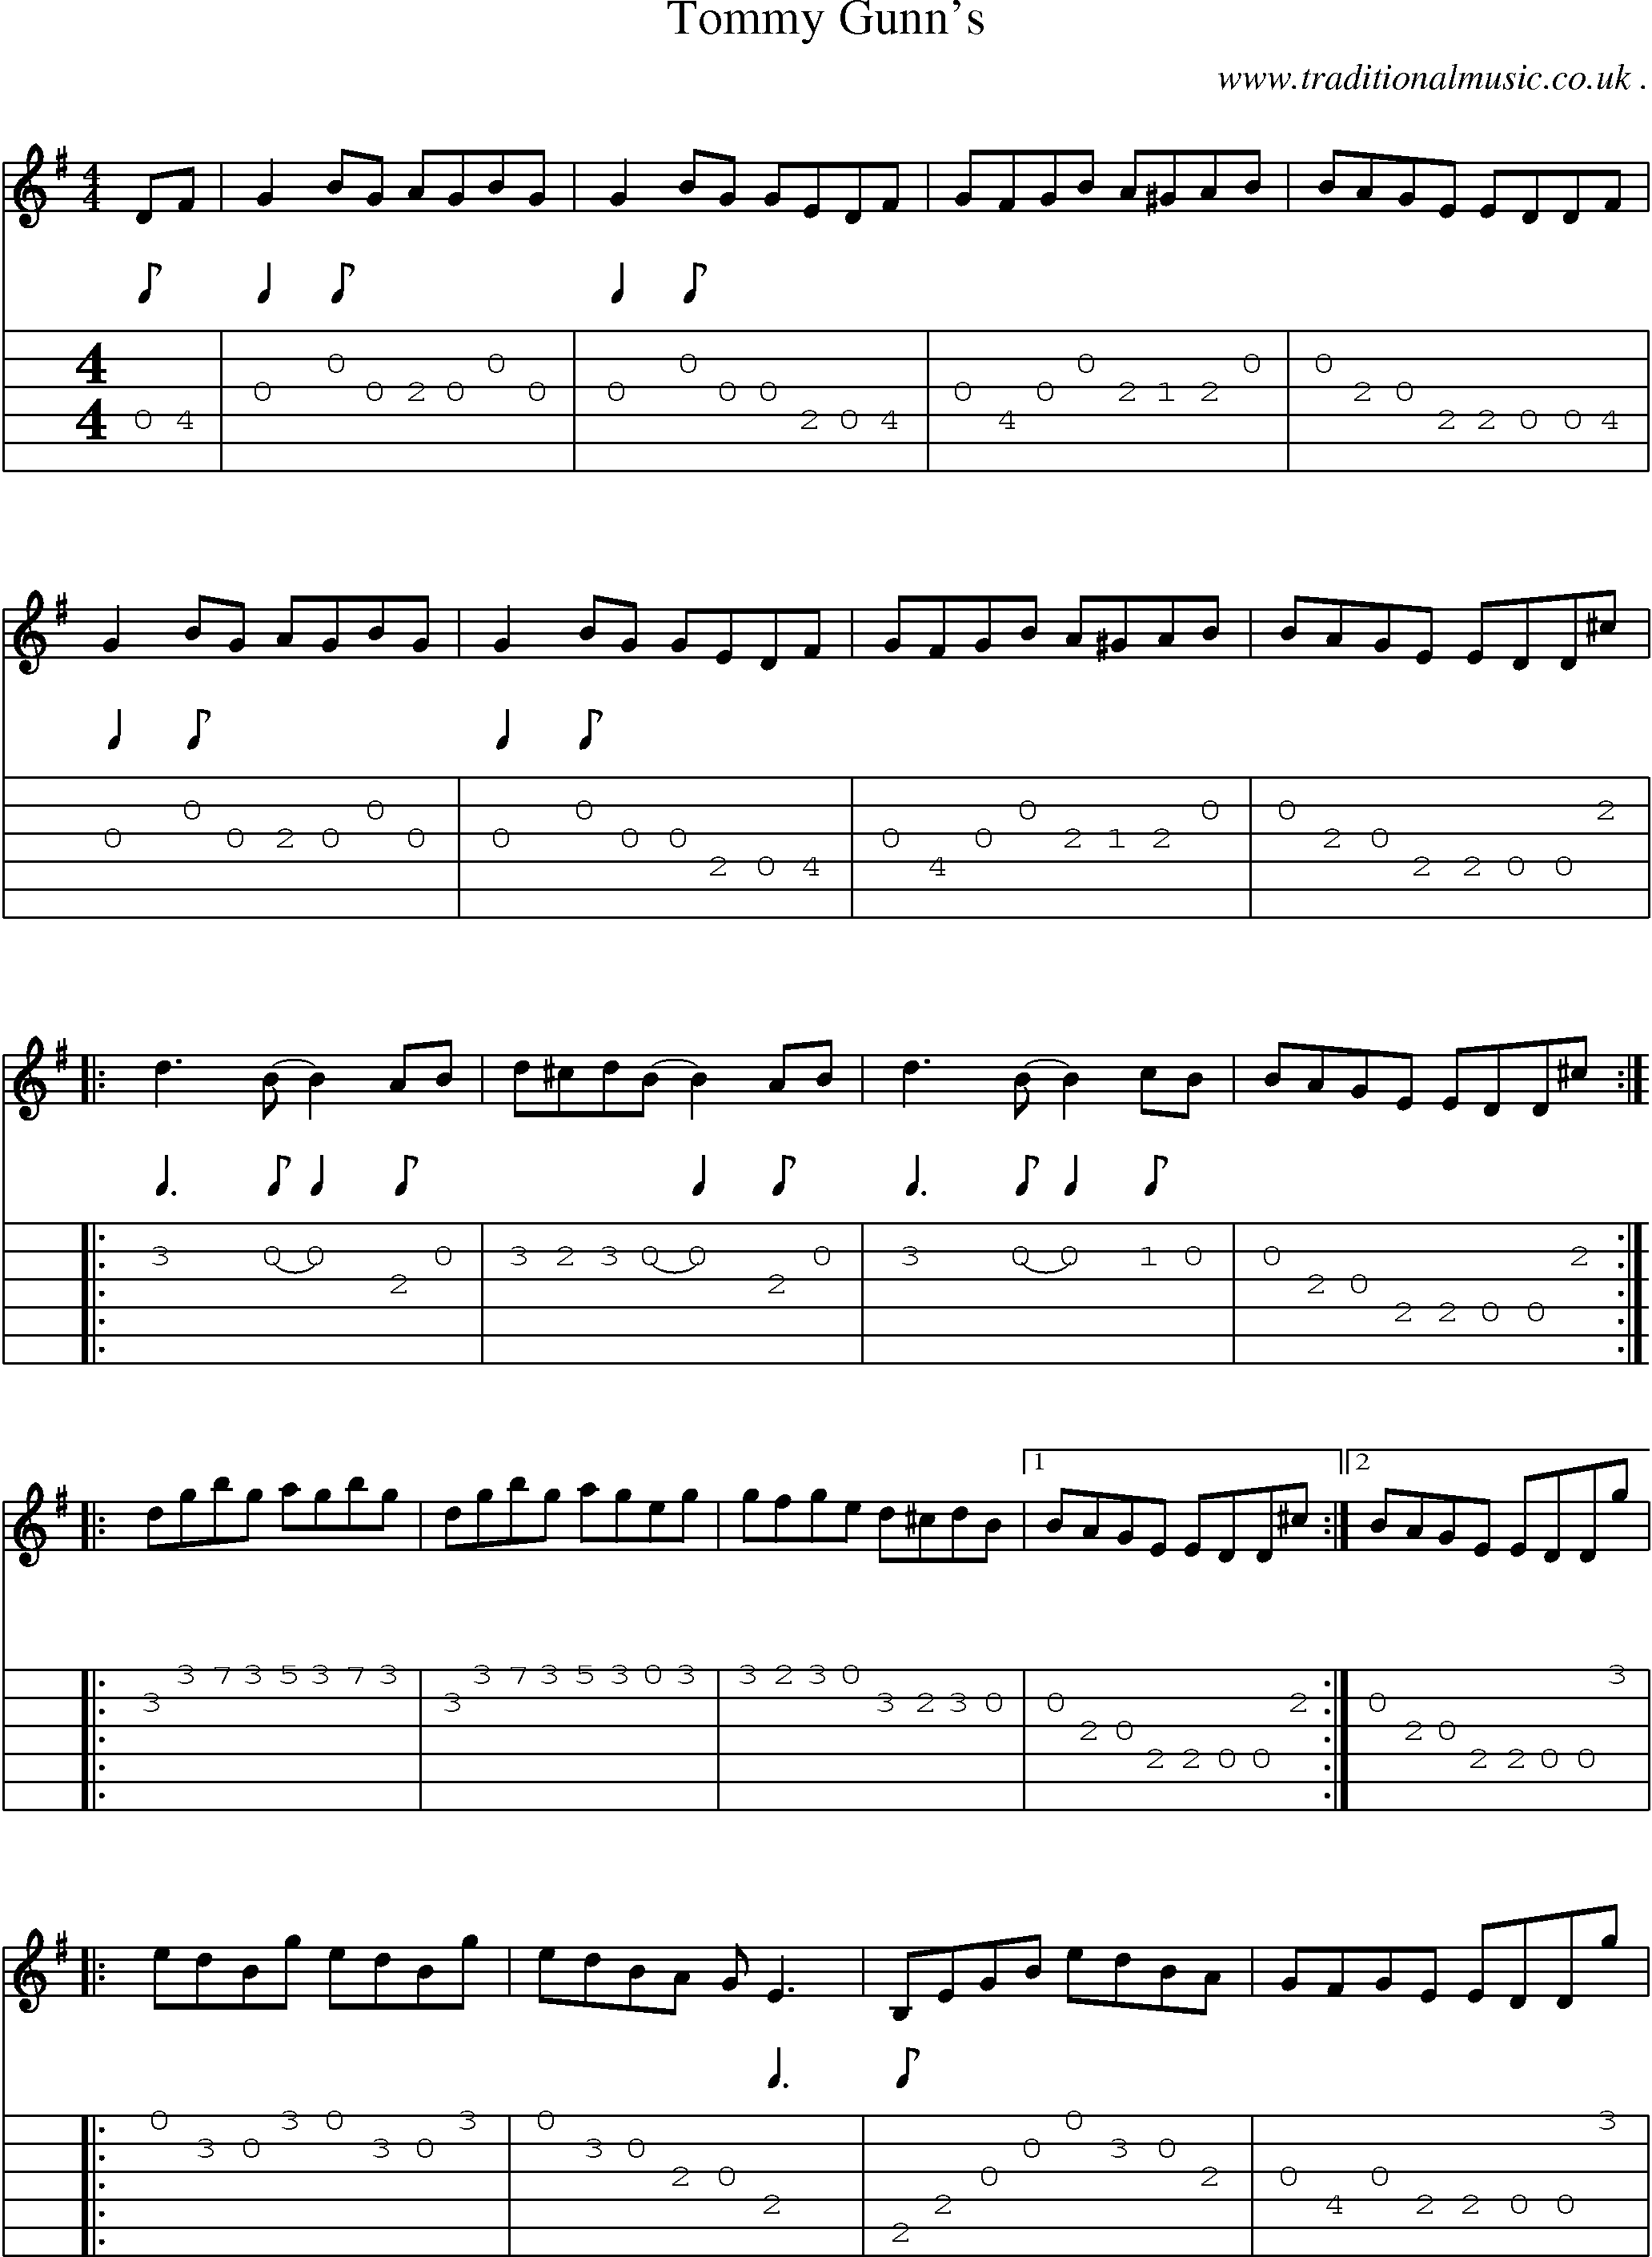 Sheet-Music and Guitar Tabs for Tommy Gunns